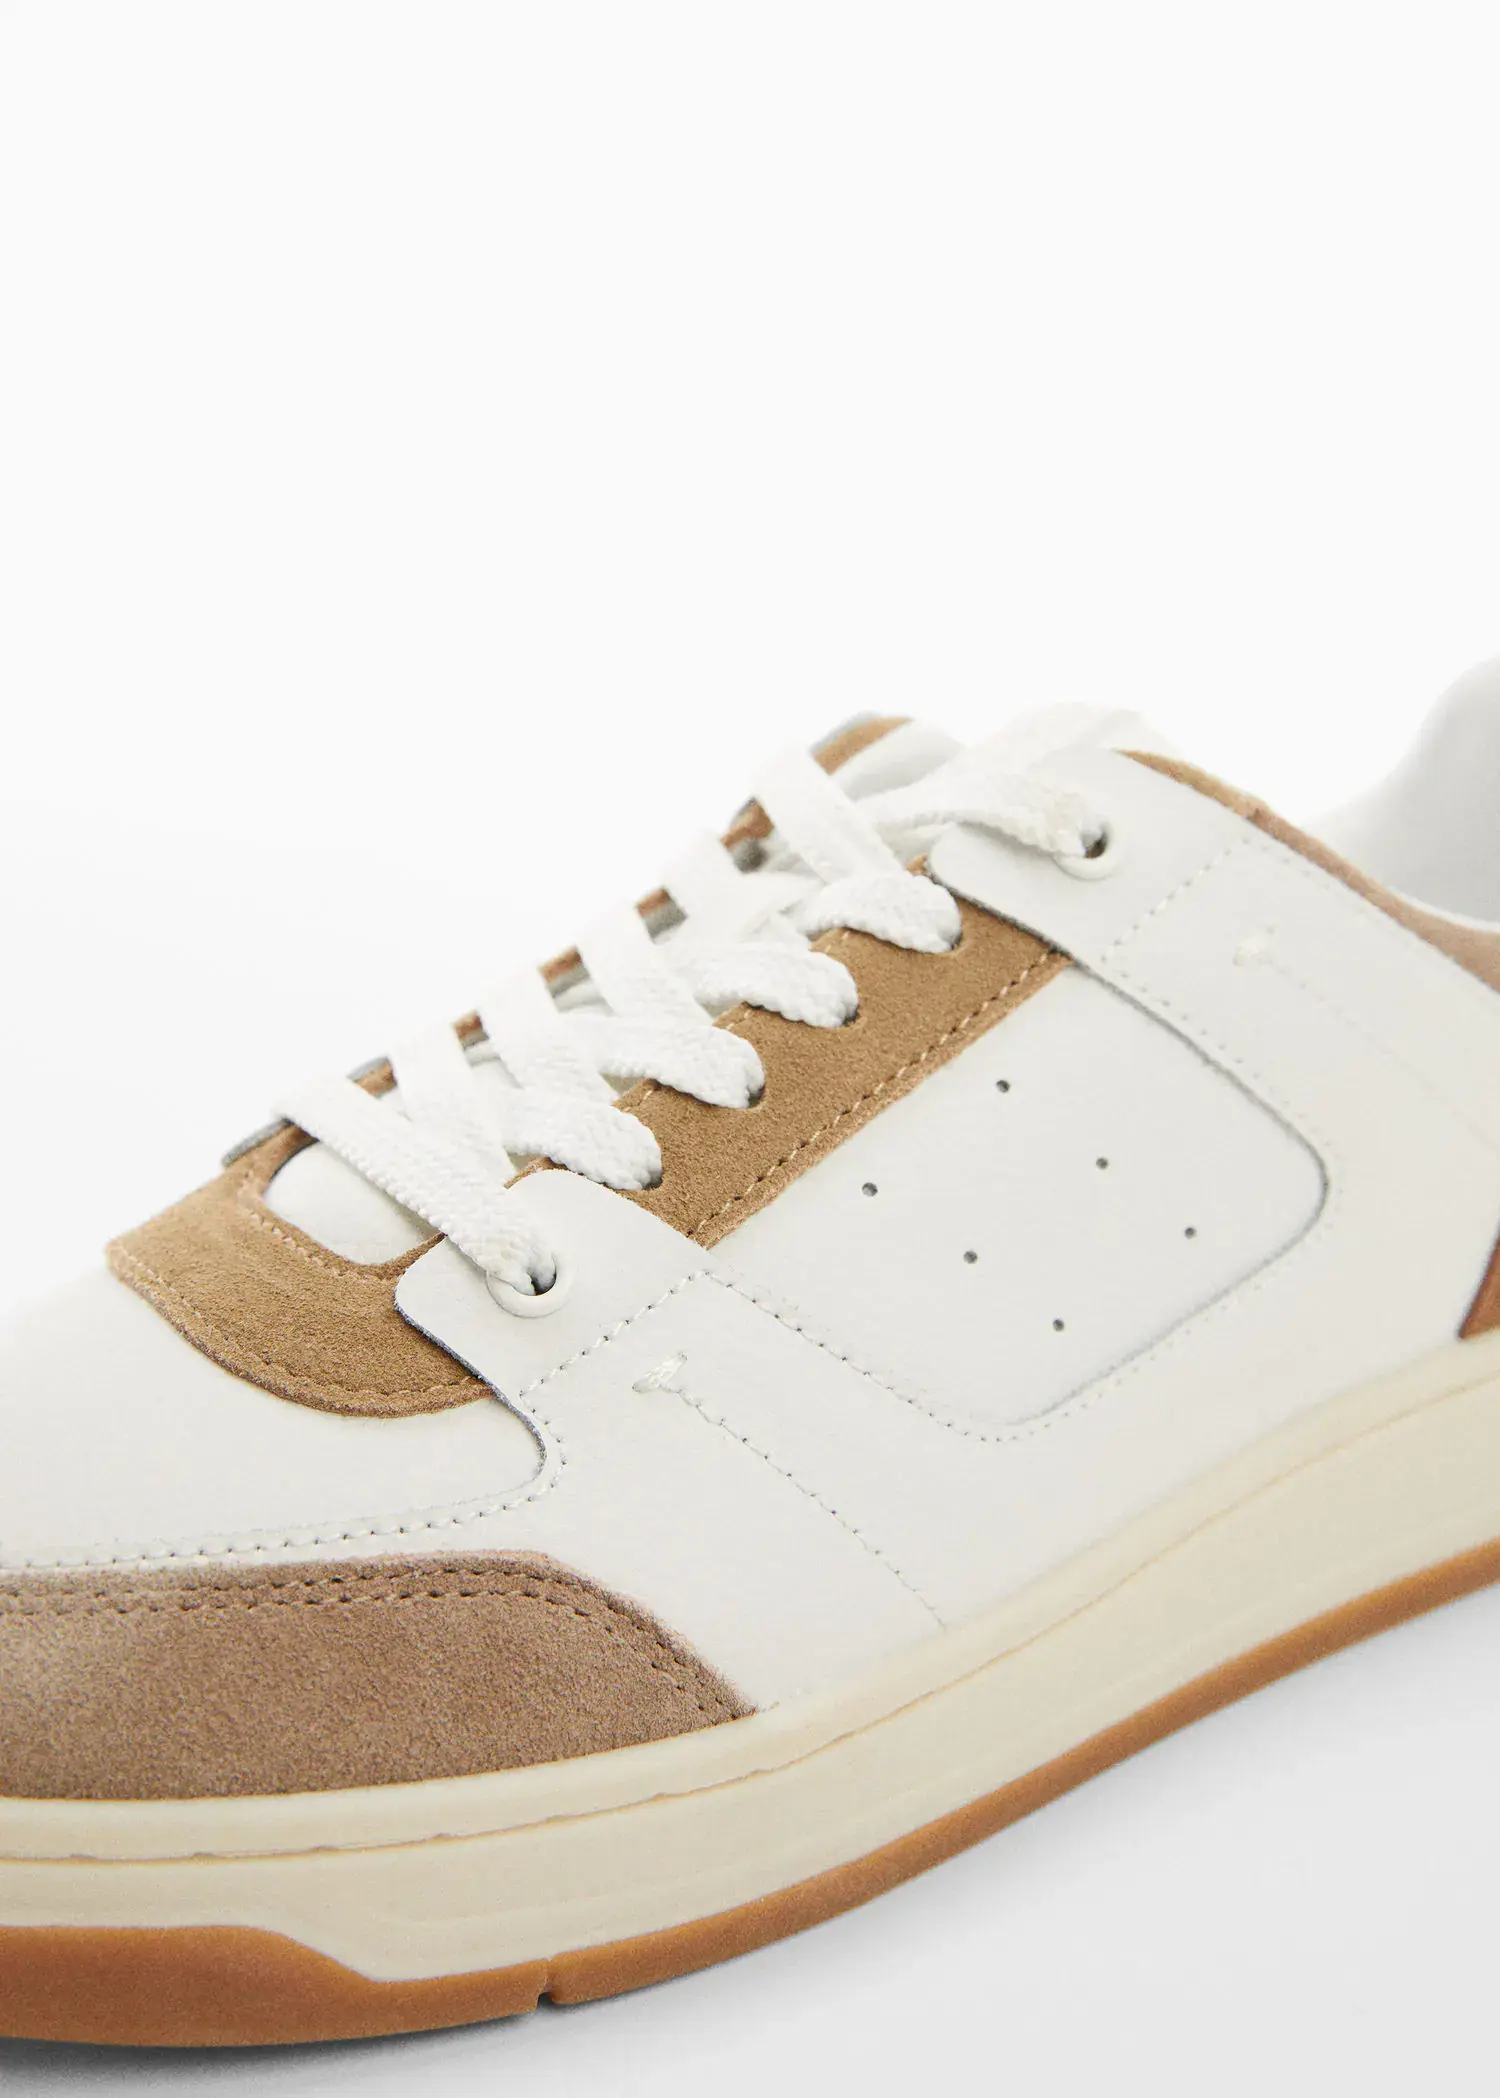 Mango Leather mixed sneakers. 2